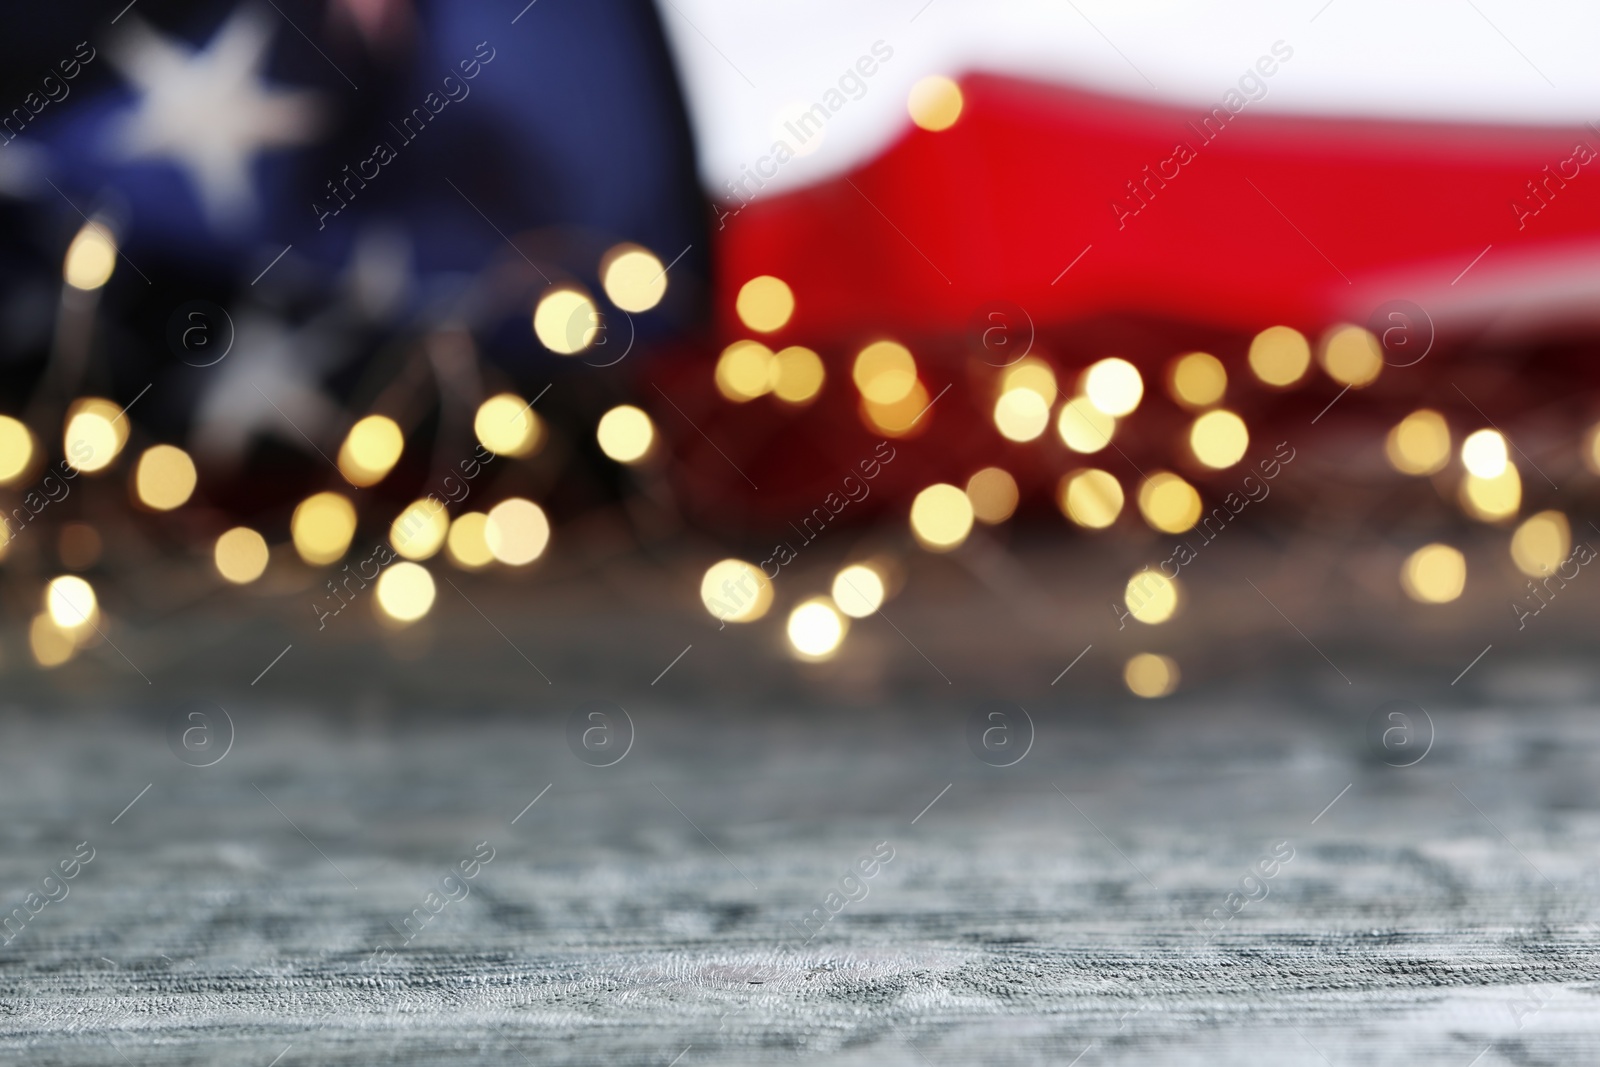 Photo of Blurred lights and American flag on wooden table. Mockup for design